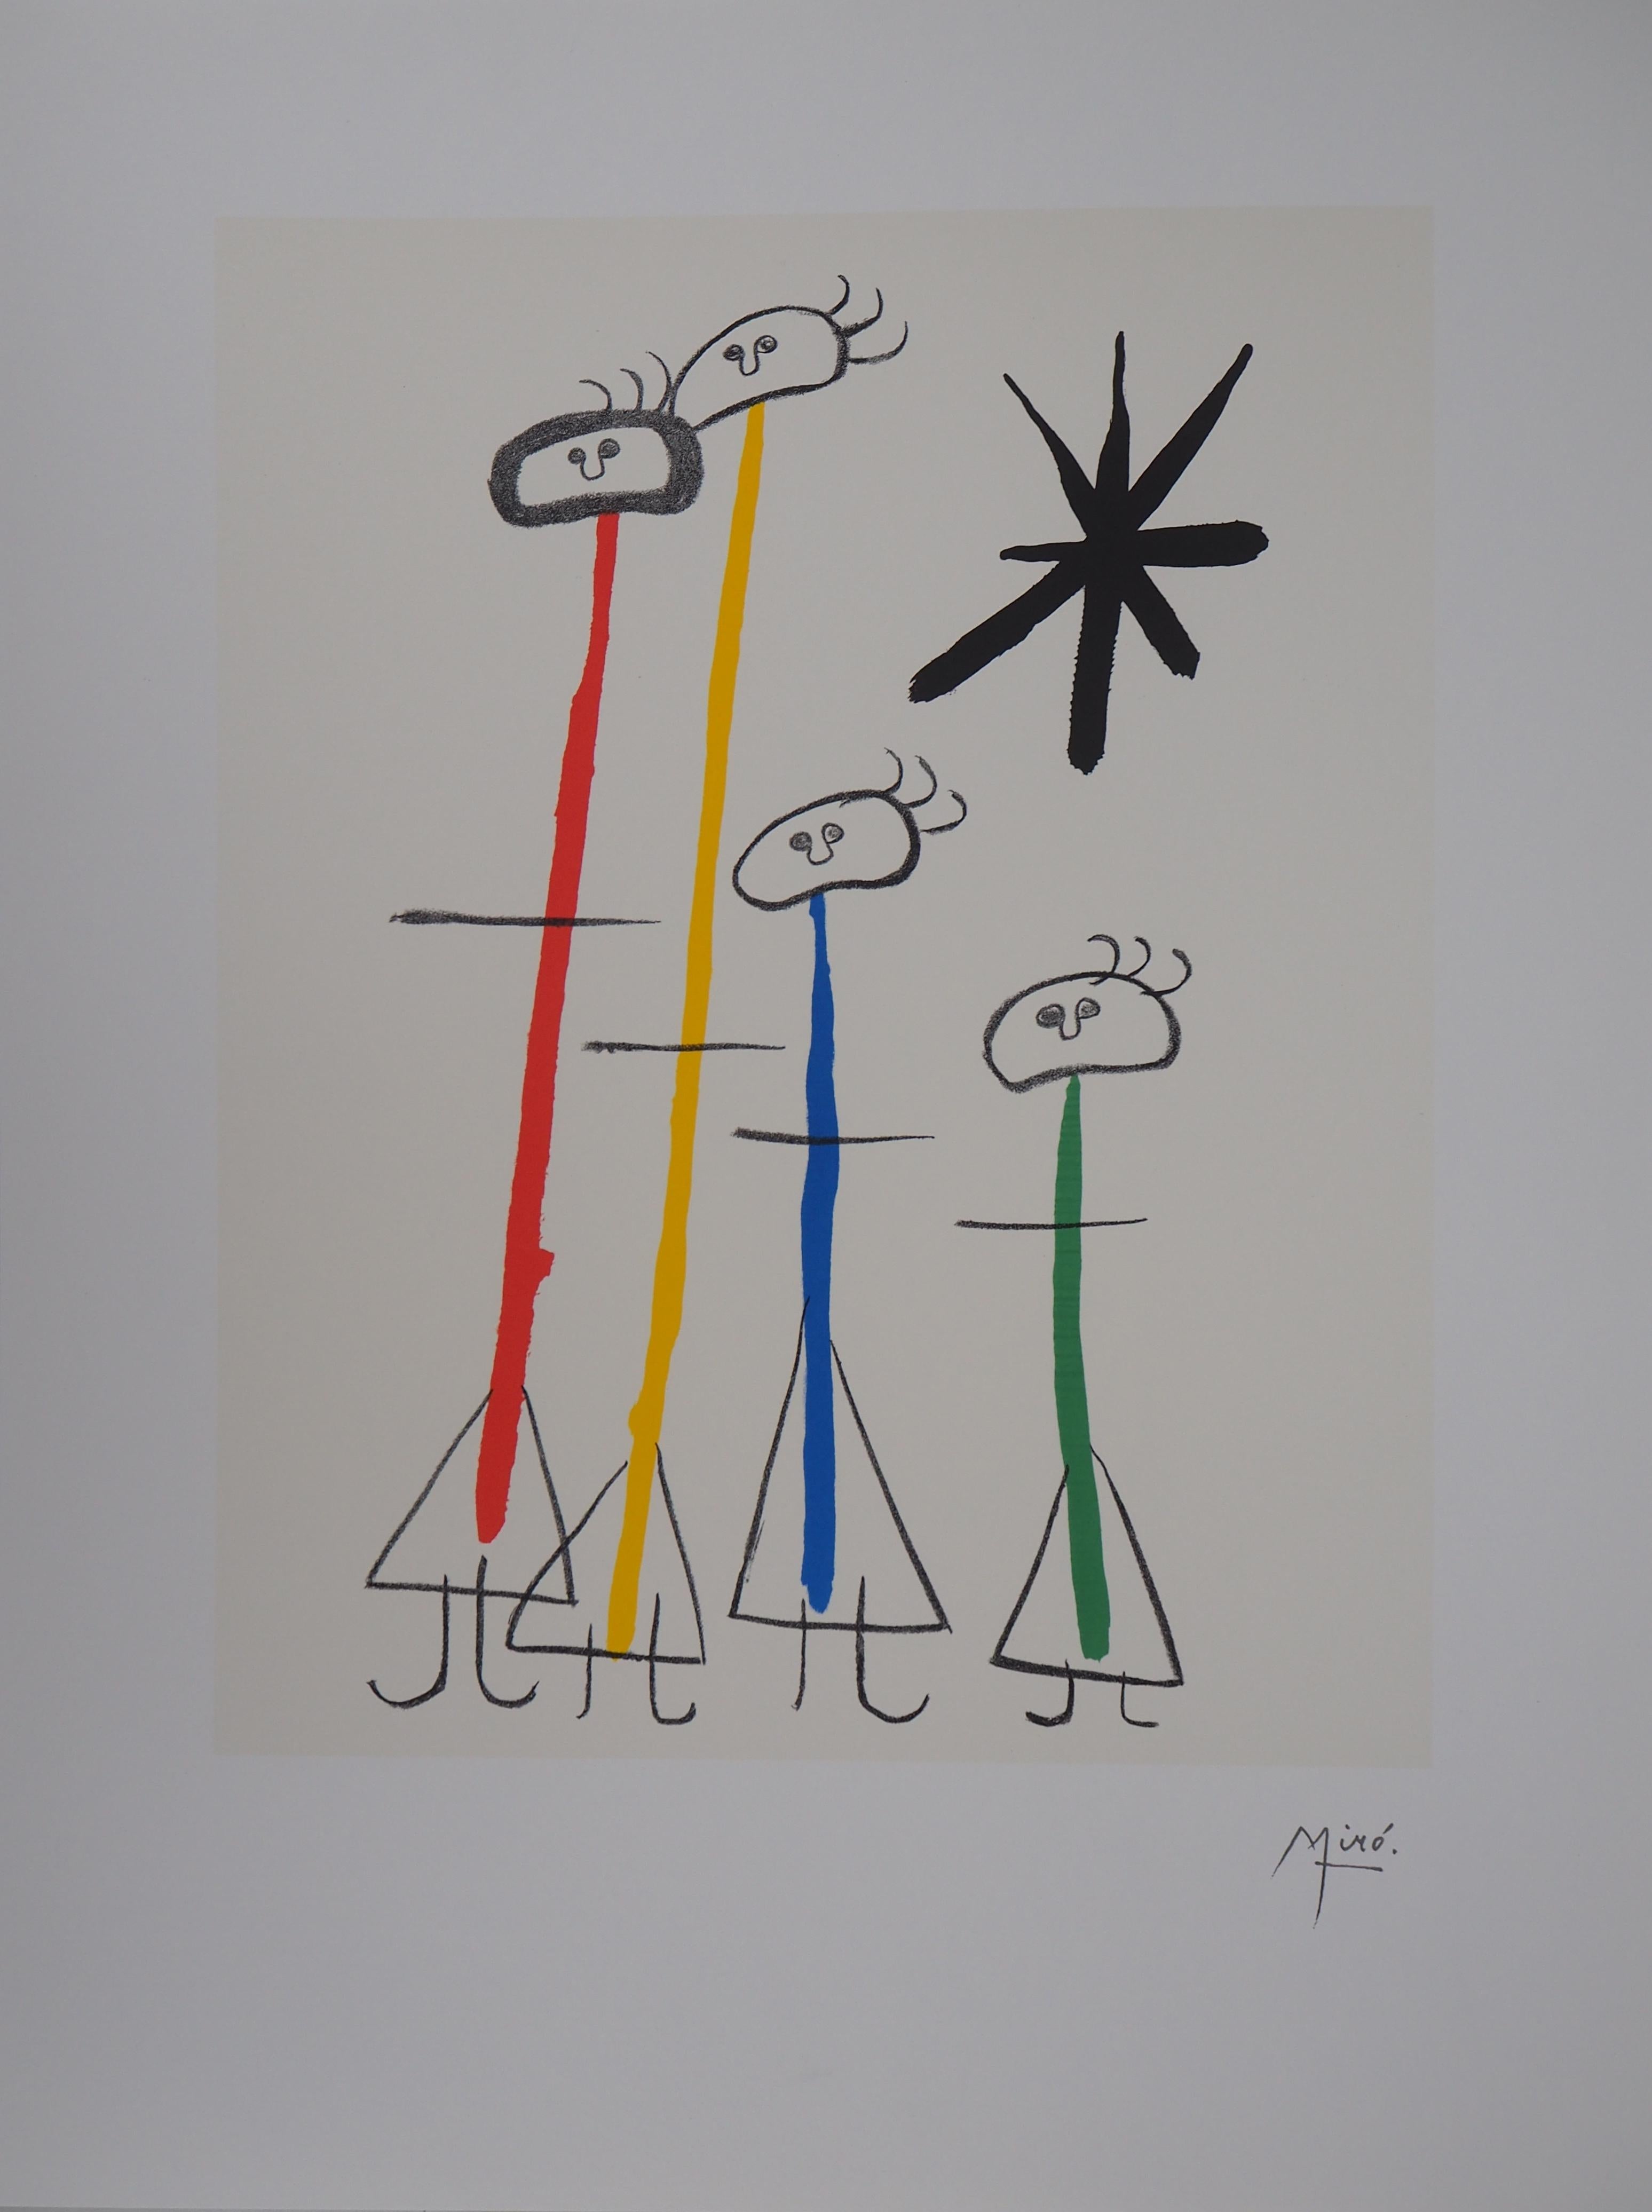 (after) Joan Miró Abstract Print - Family with a Star - Lithograph